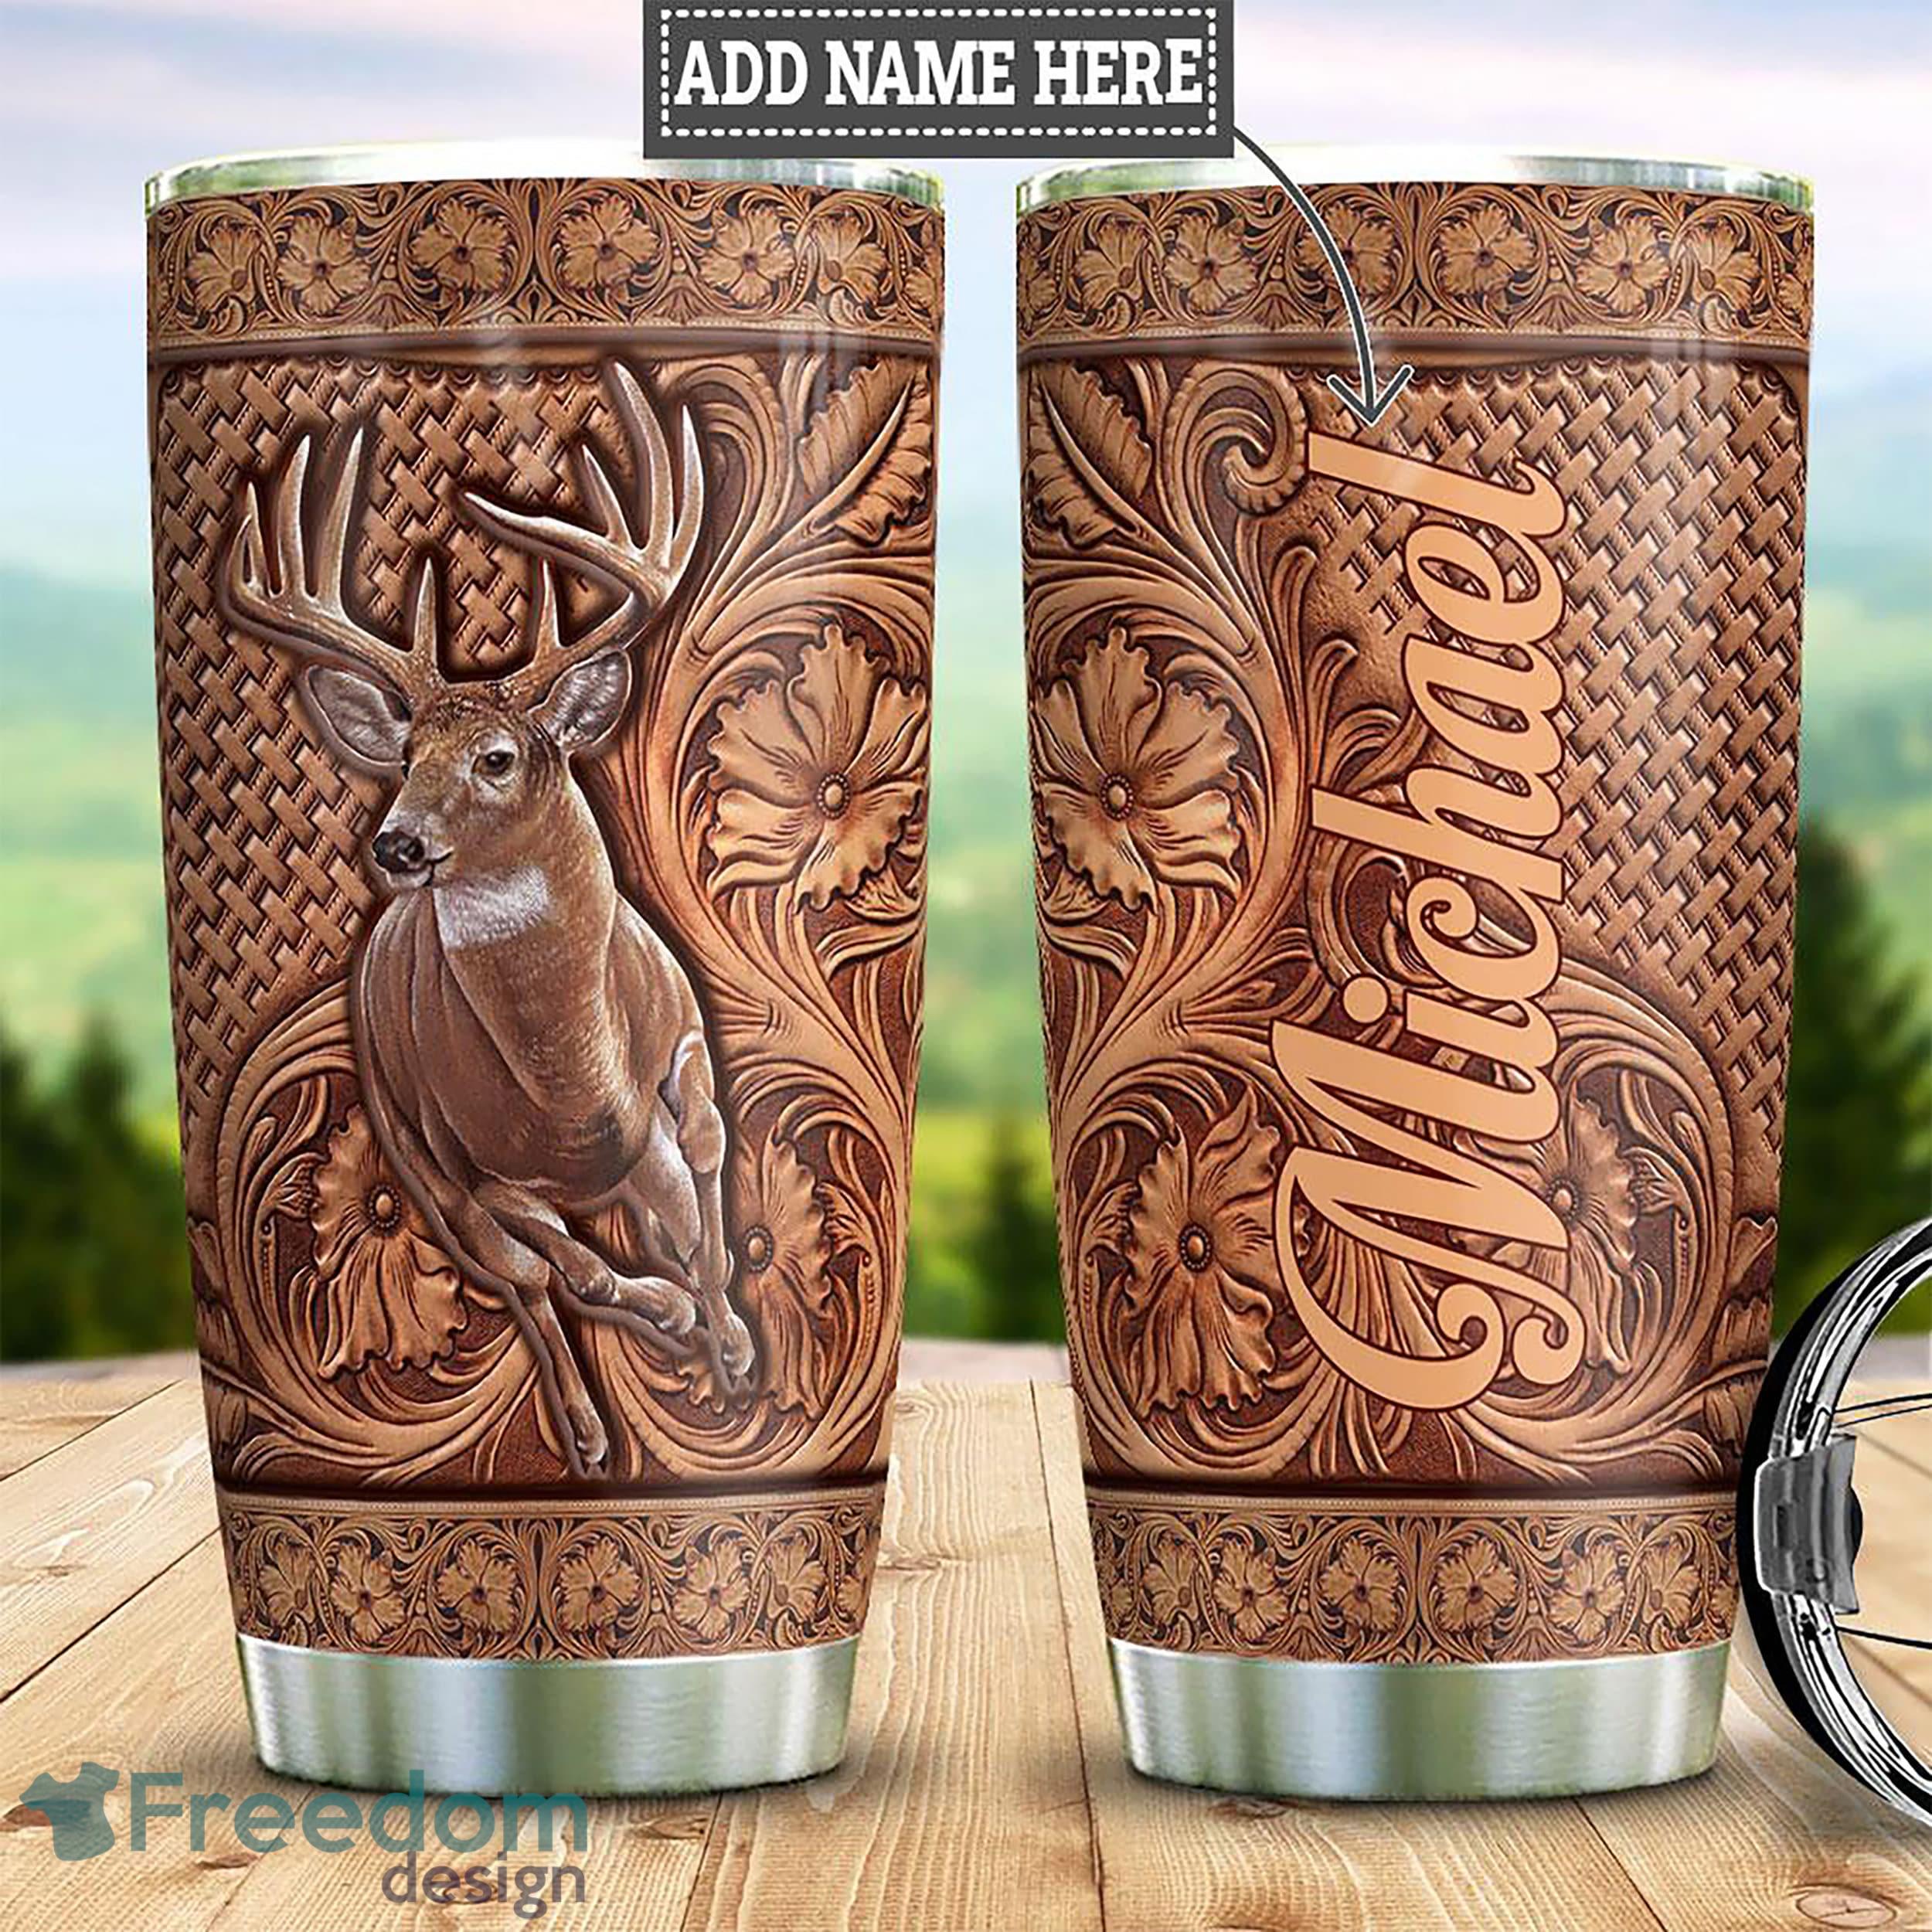 Dear Dad Personalized Engraved Tumbler With Kids Names, Stainless Cup, Gift  For Him